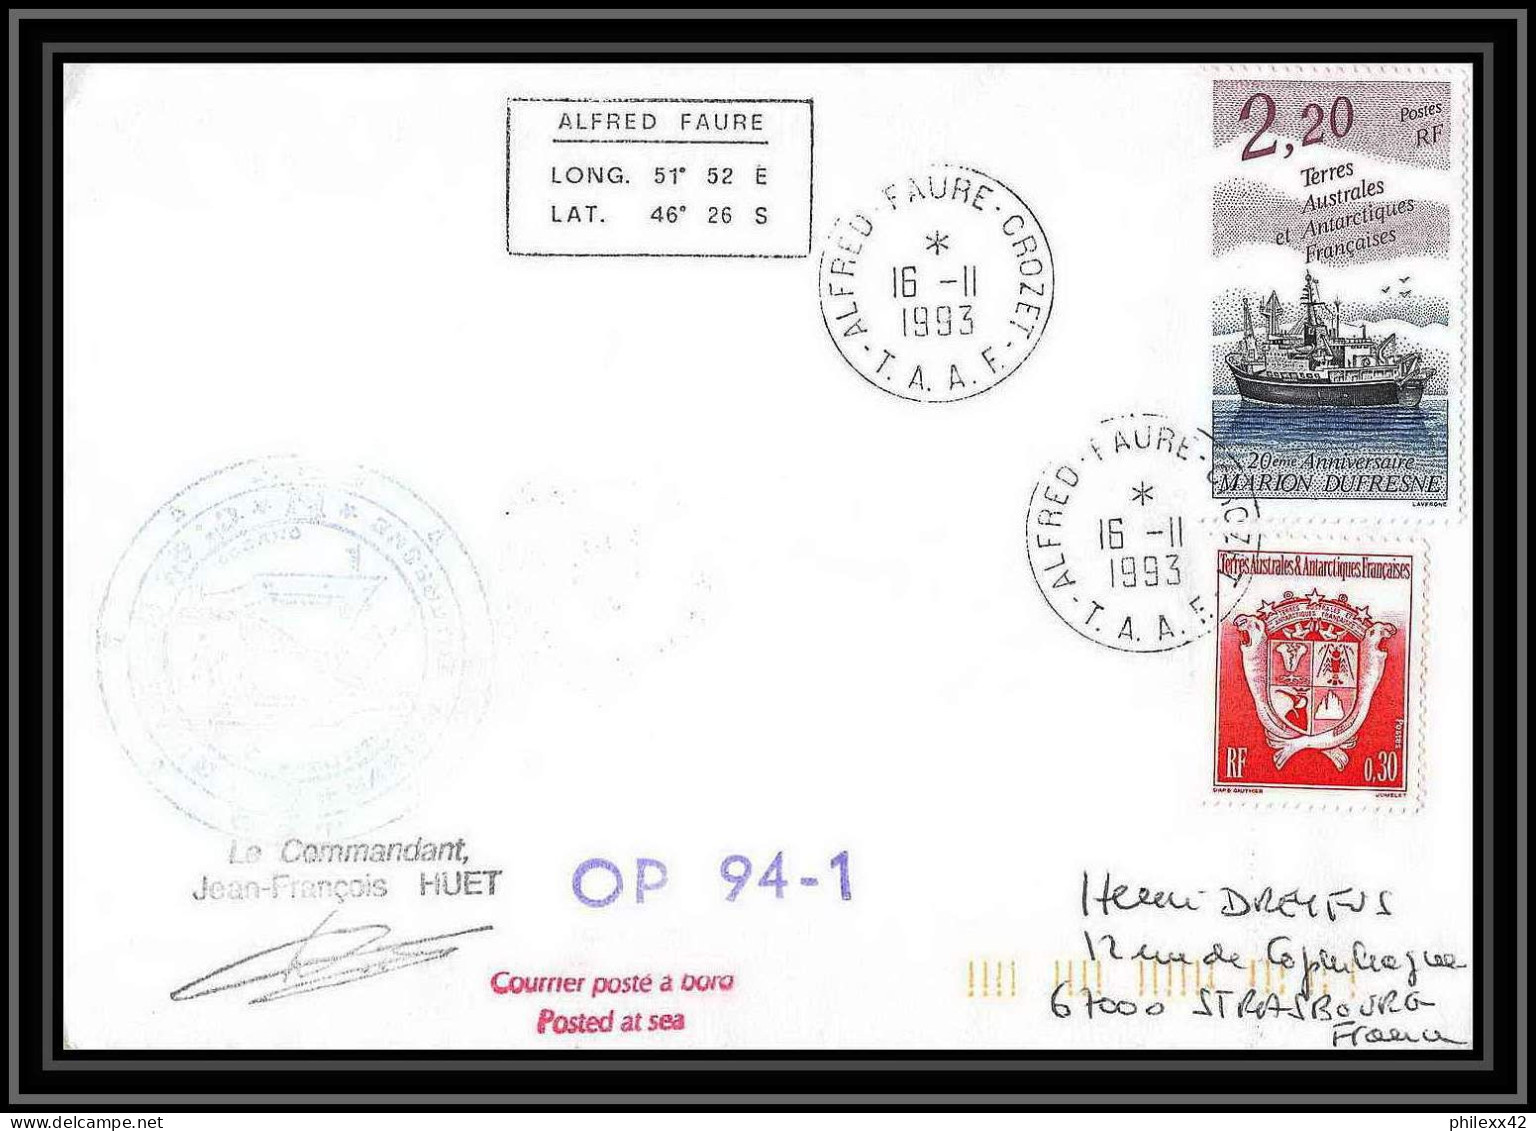 2323 ANTARCTIC Terres Australes TAAF Lettre Cover Dufresne Op 94/1 Signé Signed 16/11/1993 - Spedizioni Antartiche